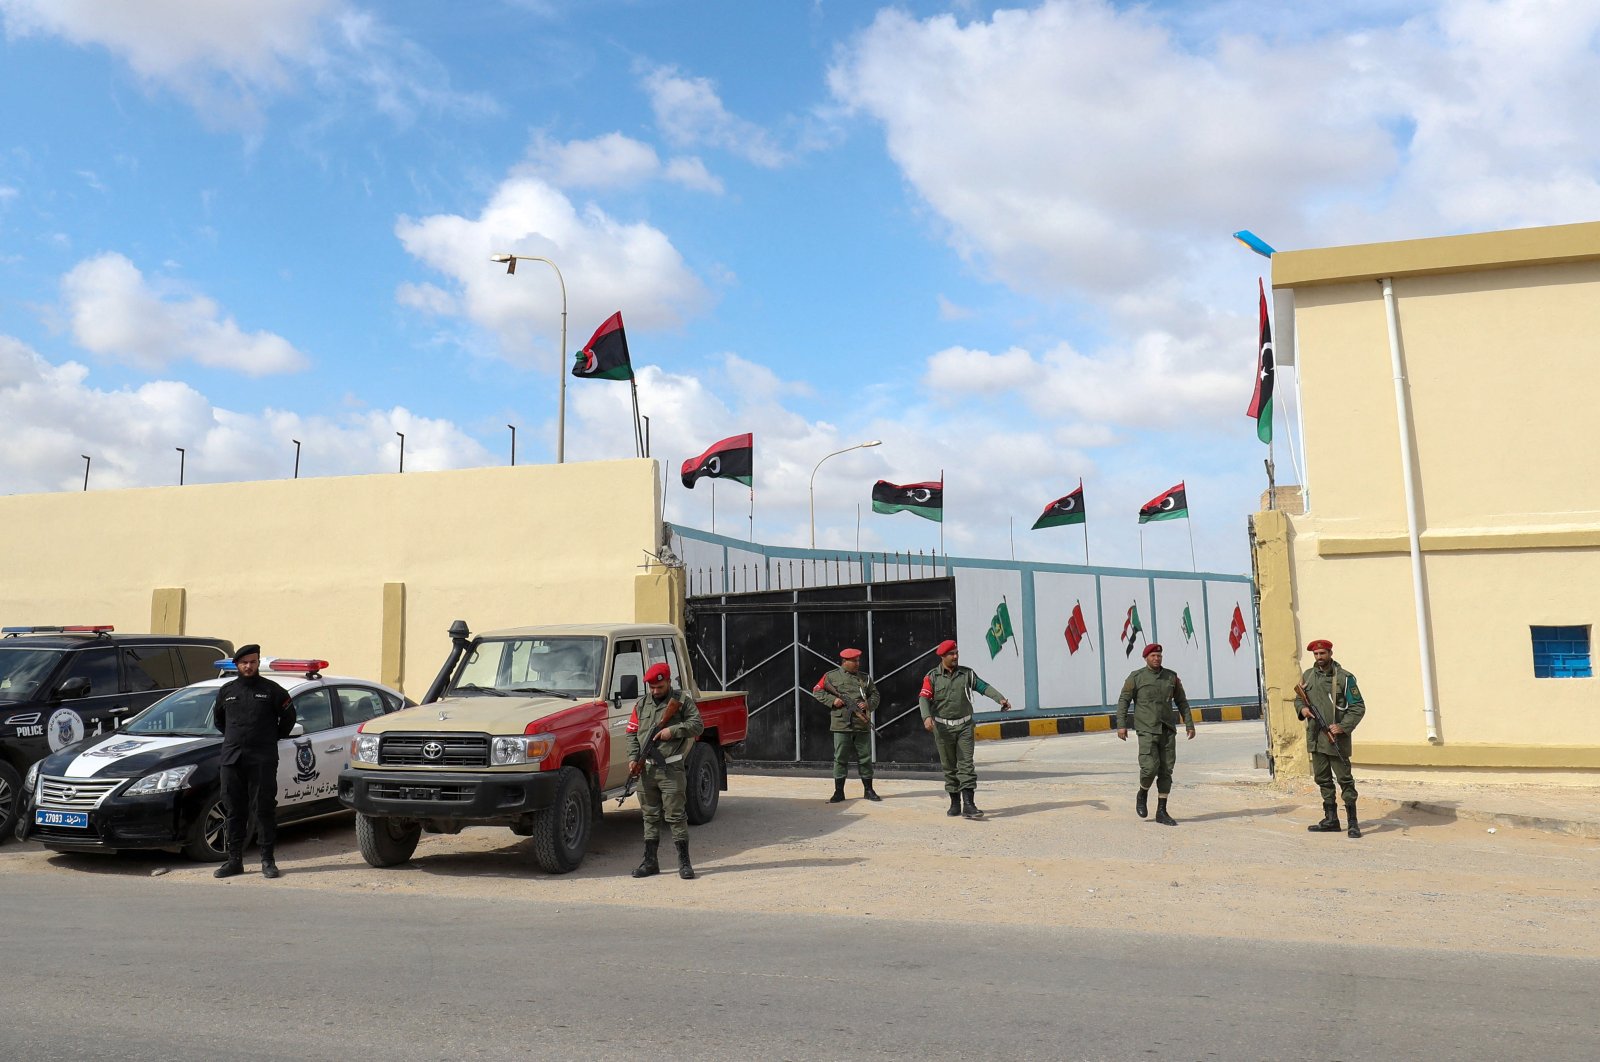 Libyan security forces stand guard outside a newly-opened shelter for migrants in the capital Tripoli on March 9, 2022. - More than 1,160 migrants died at sea attempting to reach Europe from North Africa in the first half of 2021, up 155 percent year-on-year, the UN's migration agency said. (Photo by Mahmud Turkia / AFP)